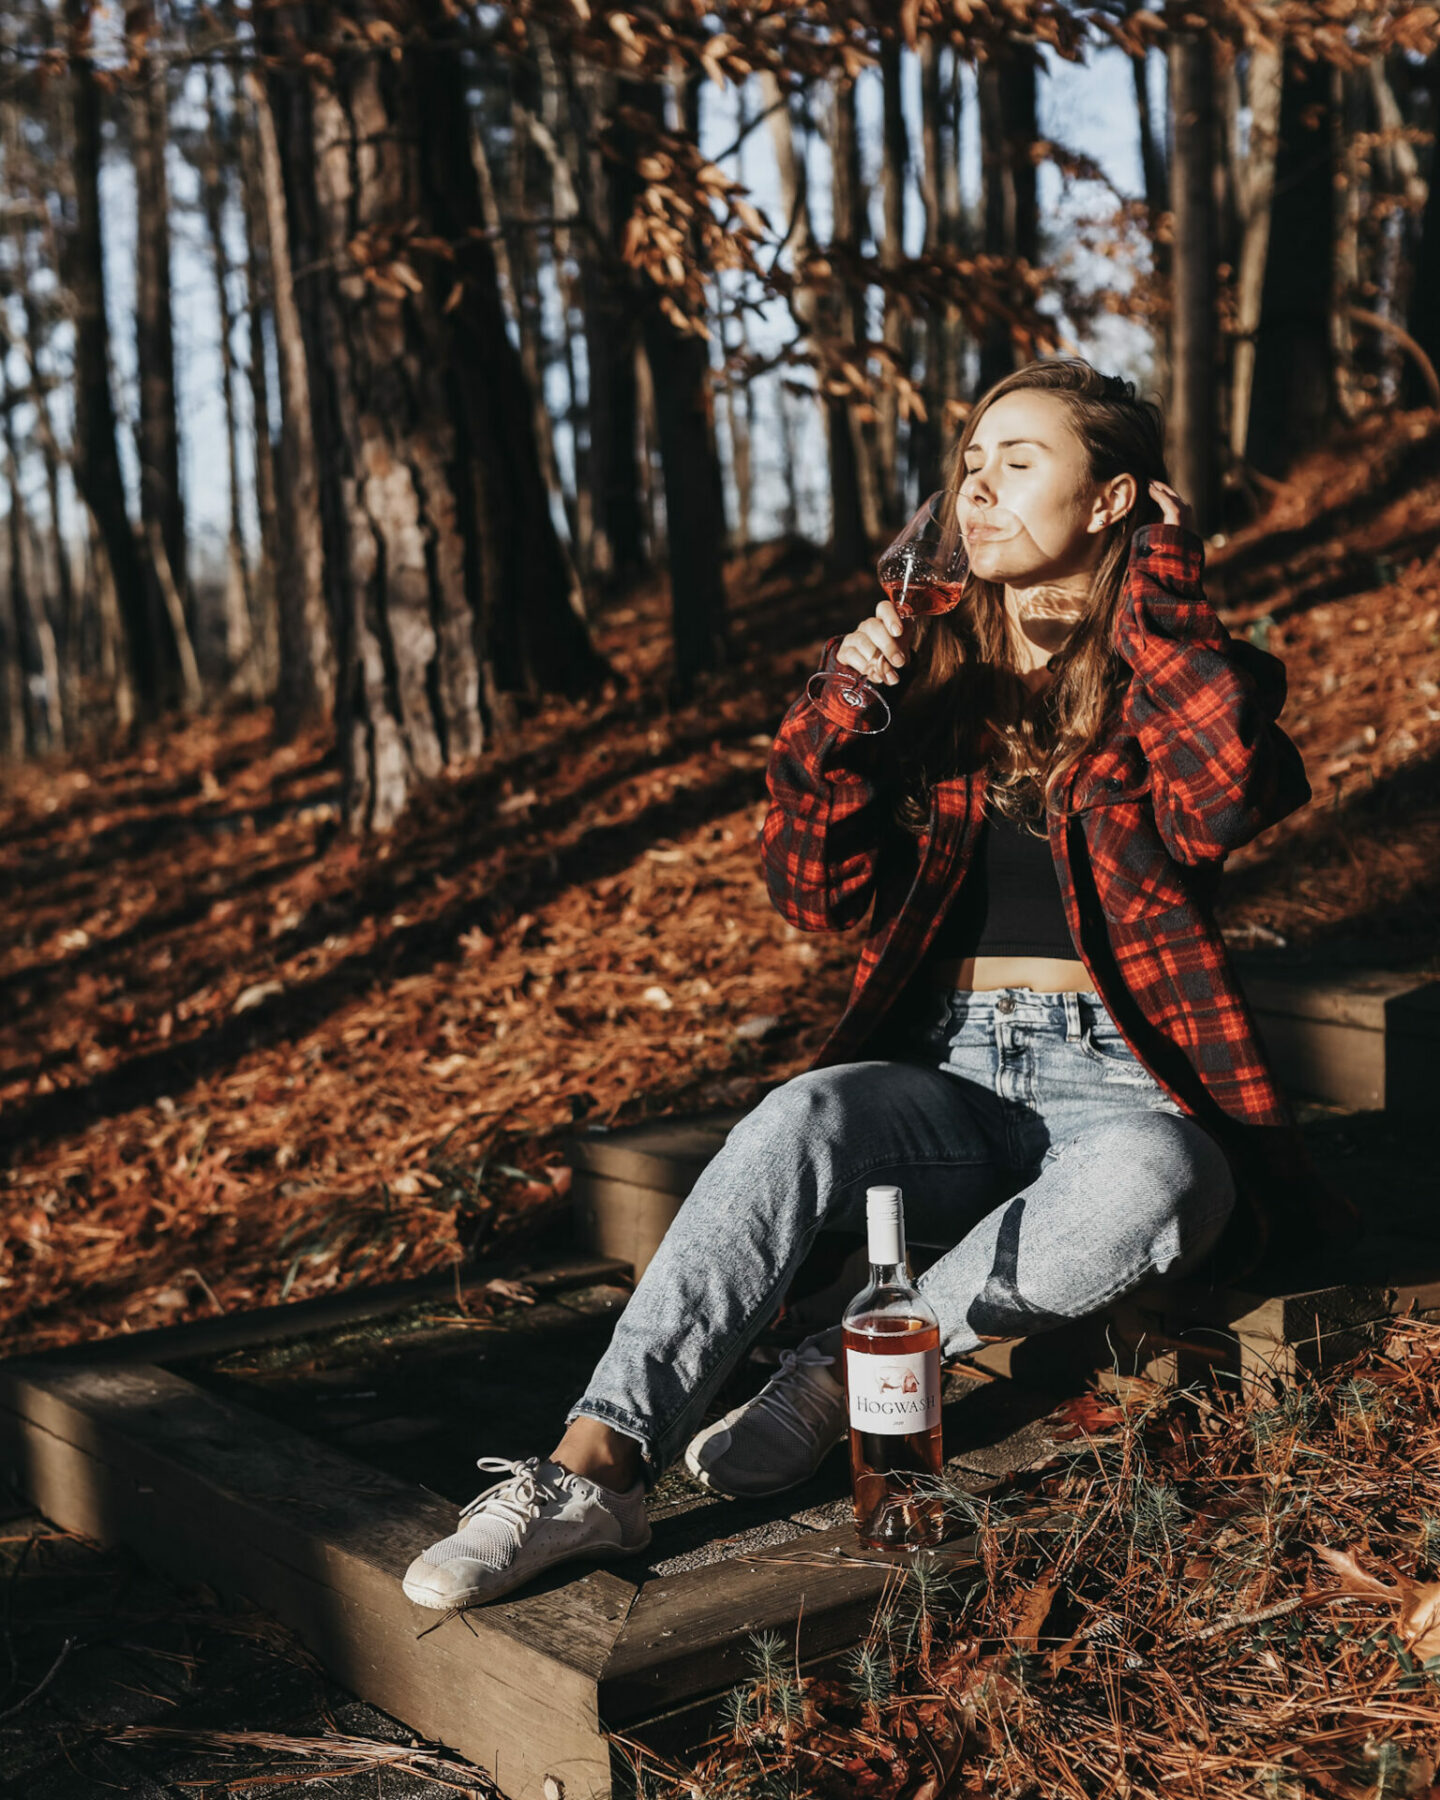 Paige drinking Hogwash rose wine outside in a rustic setting, wearing plaid